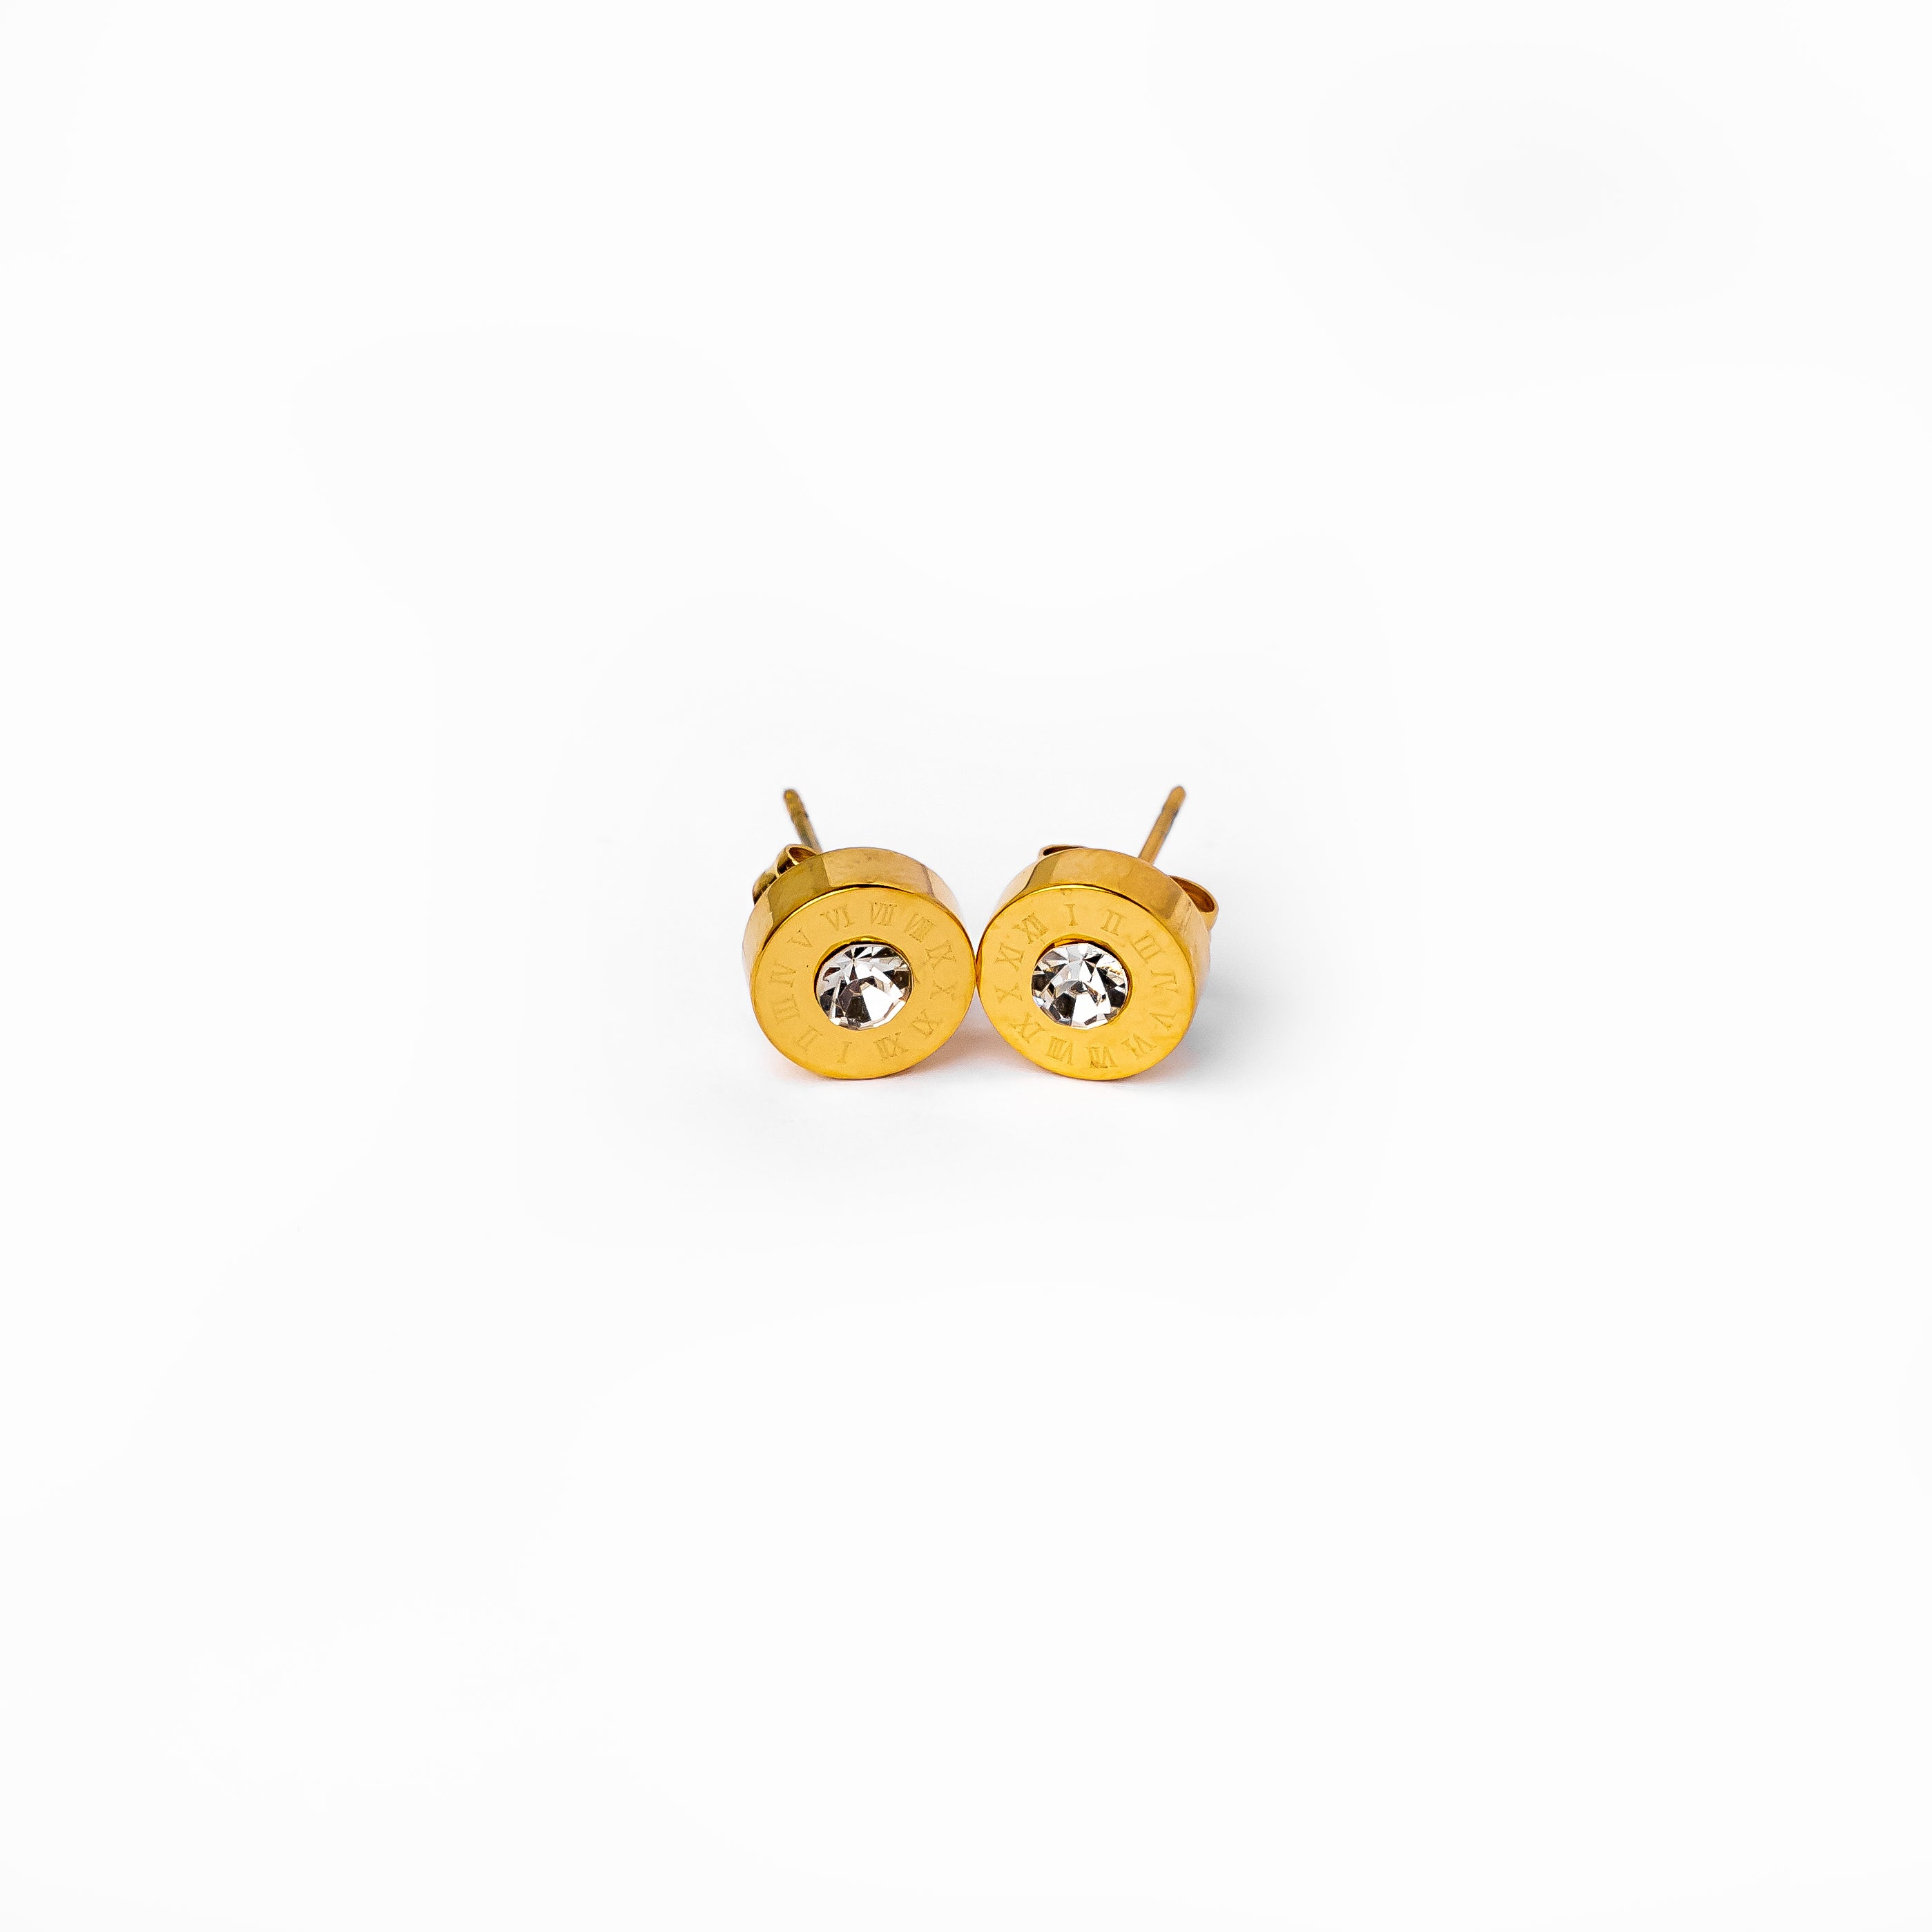 Latin Stone Stud Earrings - Gold 
USE CODE WOLF20 for 20% off